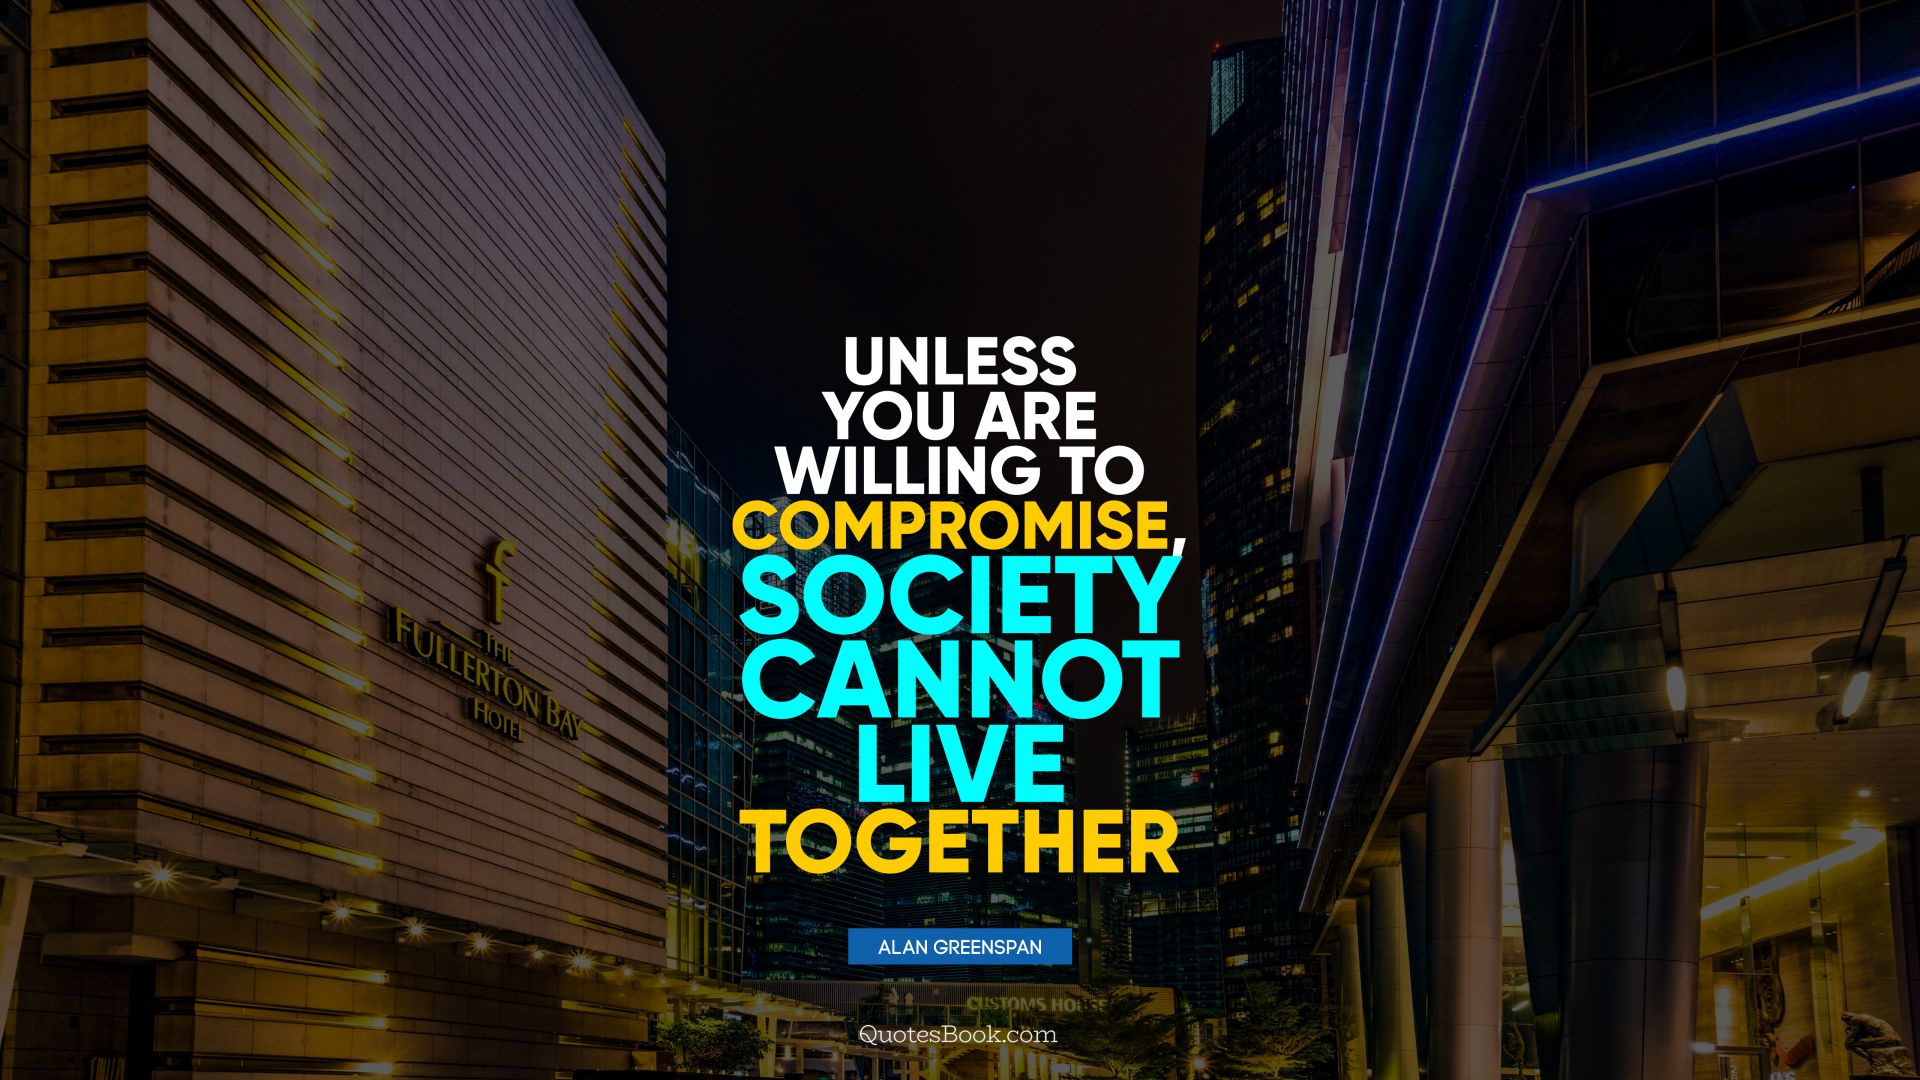 Unless you are willing to compromise, society cannot live together. - Quote by Alan Greenspan